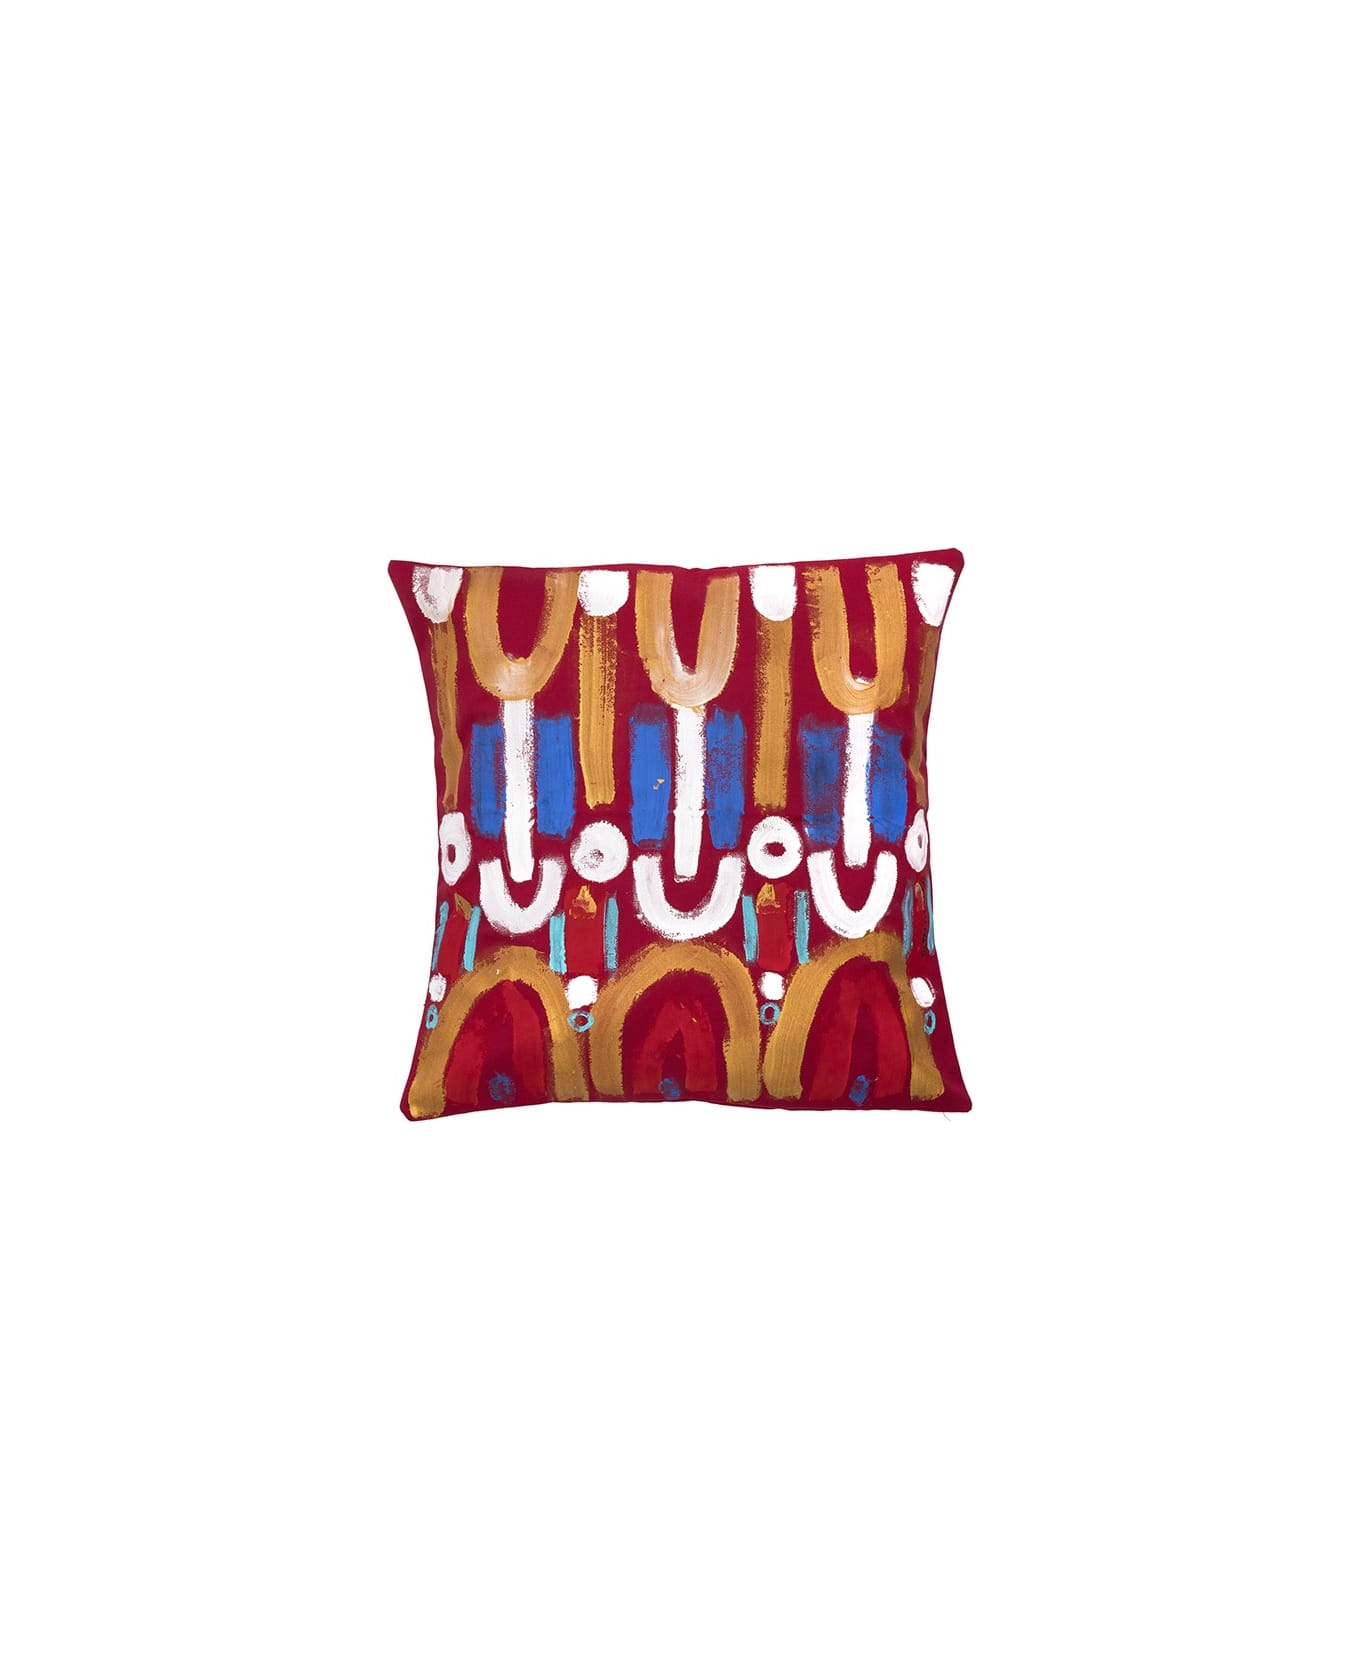 Le Botteghe su Gologone Acrylic Hand Painted Outdoor Cushion 50x50 cm - Dark Red